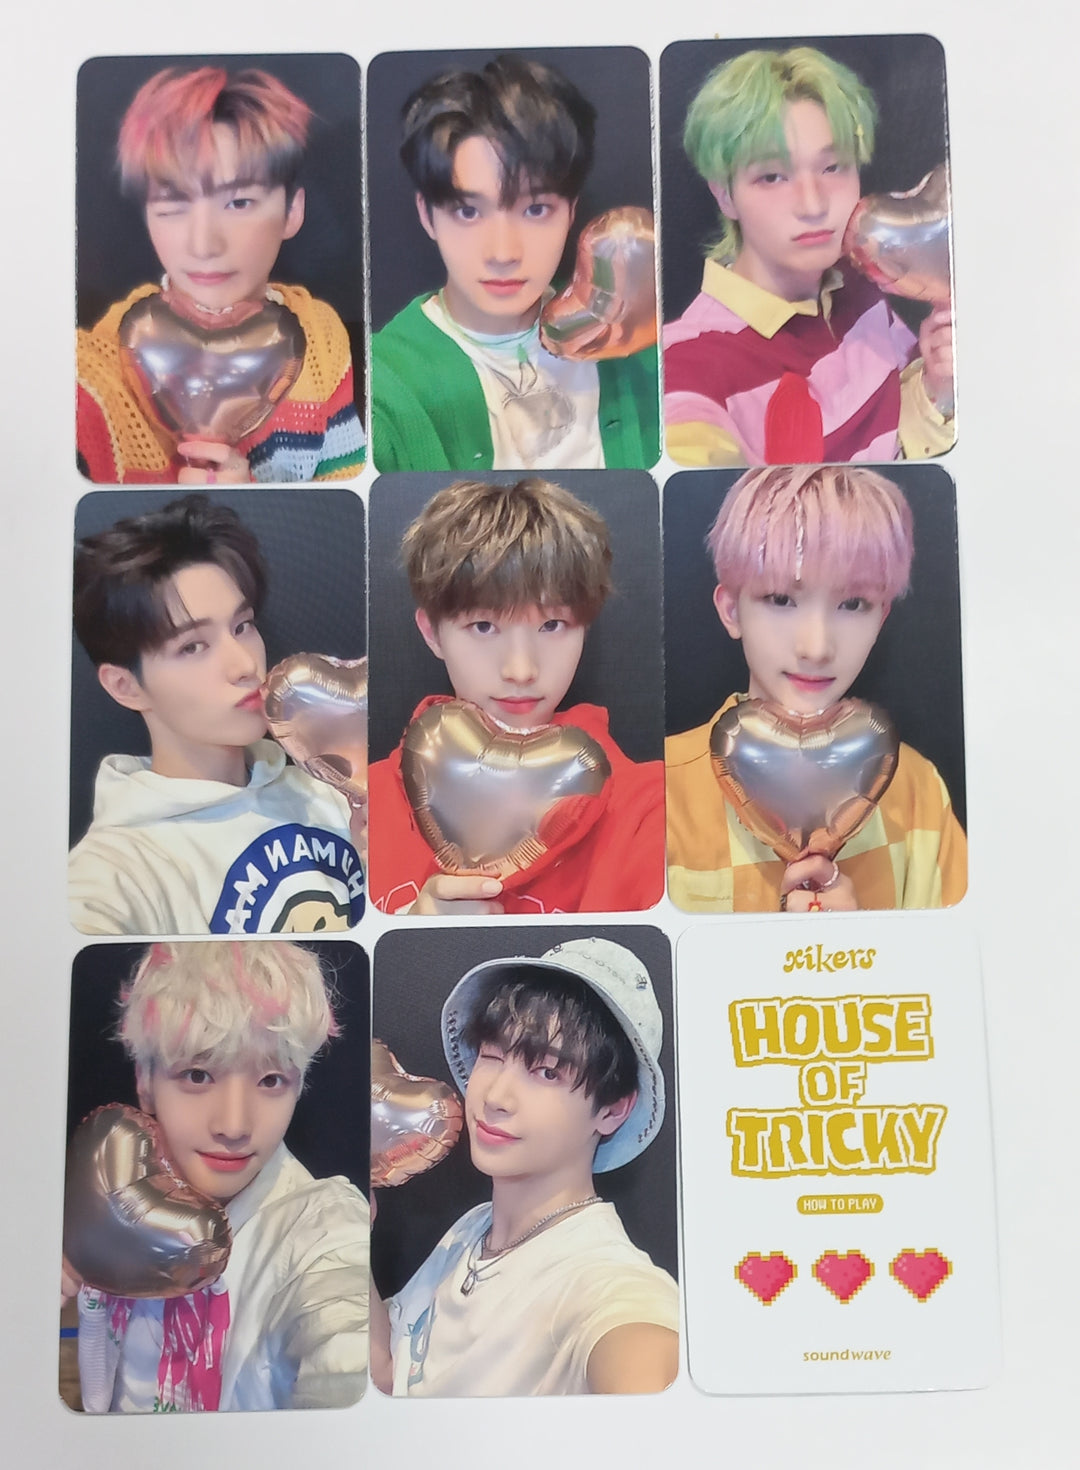 Xikers "HOUSE OF TRICKY : Doorbell Ringing" - Soundwave Fansign Event Photocard Round 5 [23.09.12]